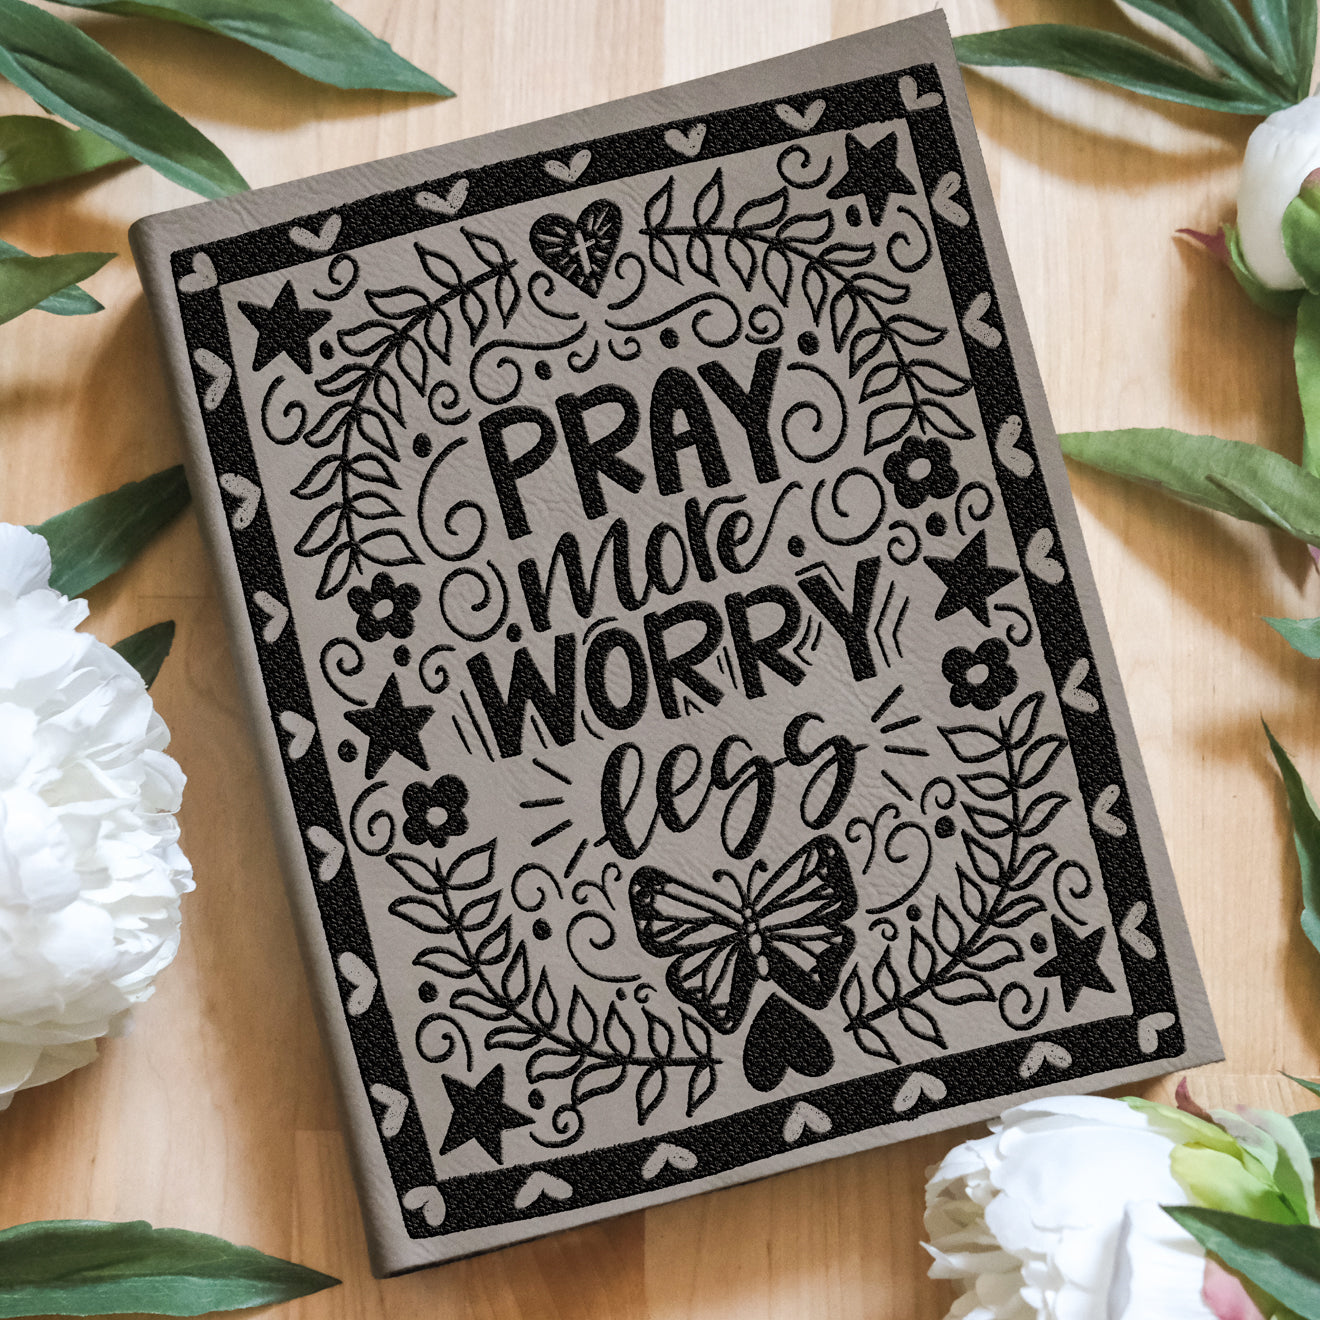 Pray More Worry Less Engraved Bible